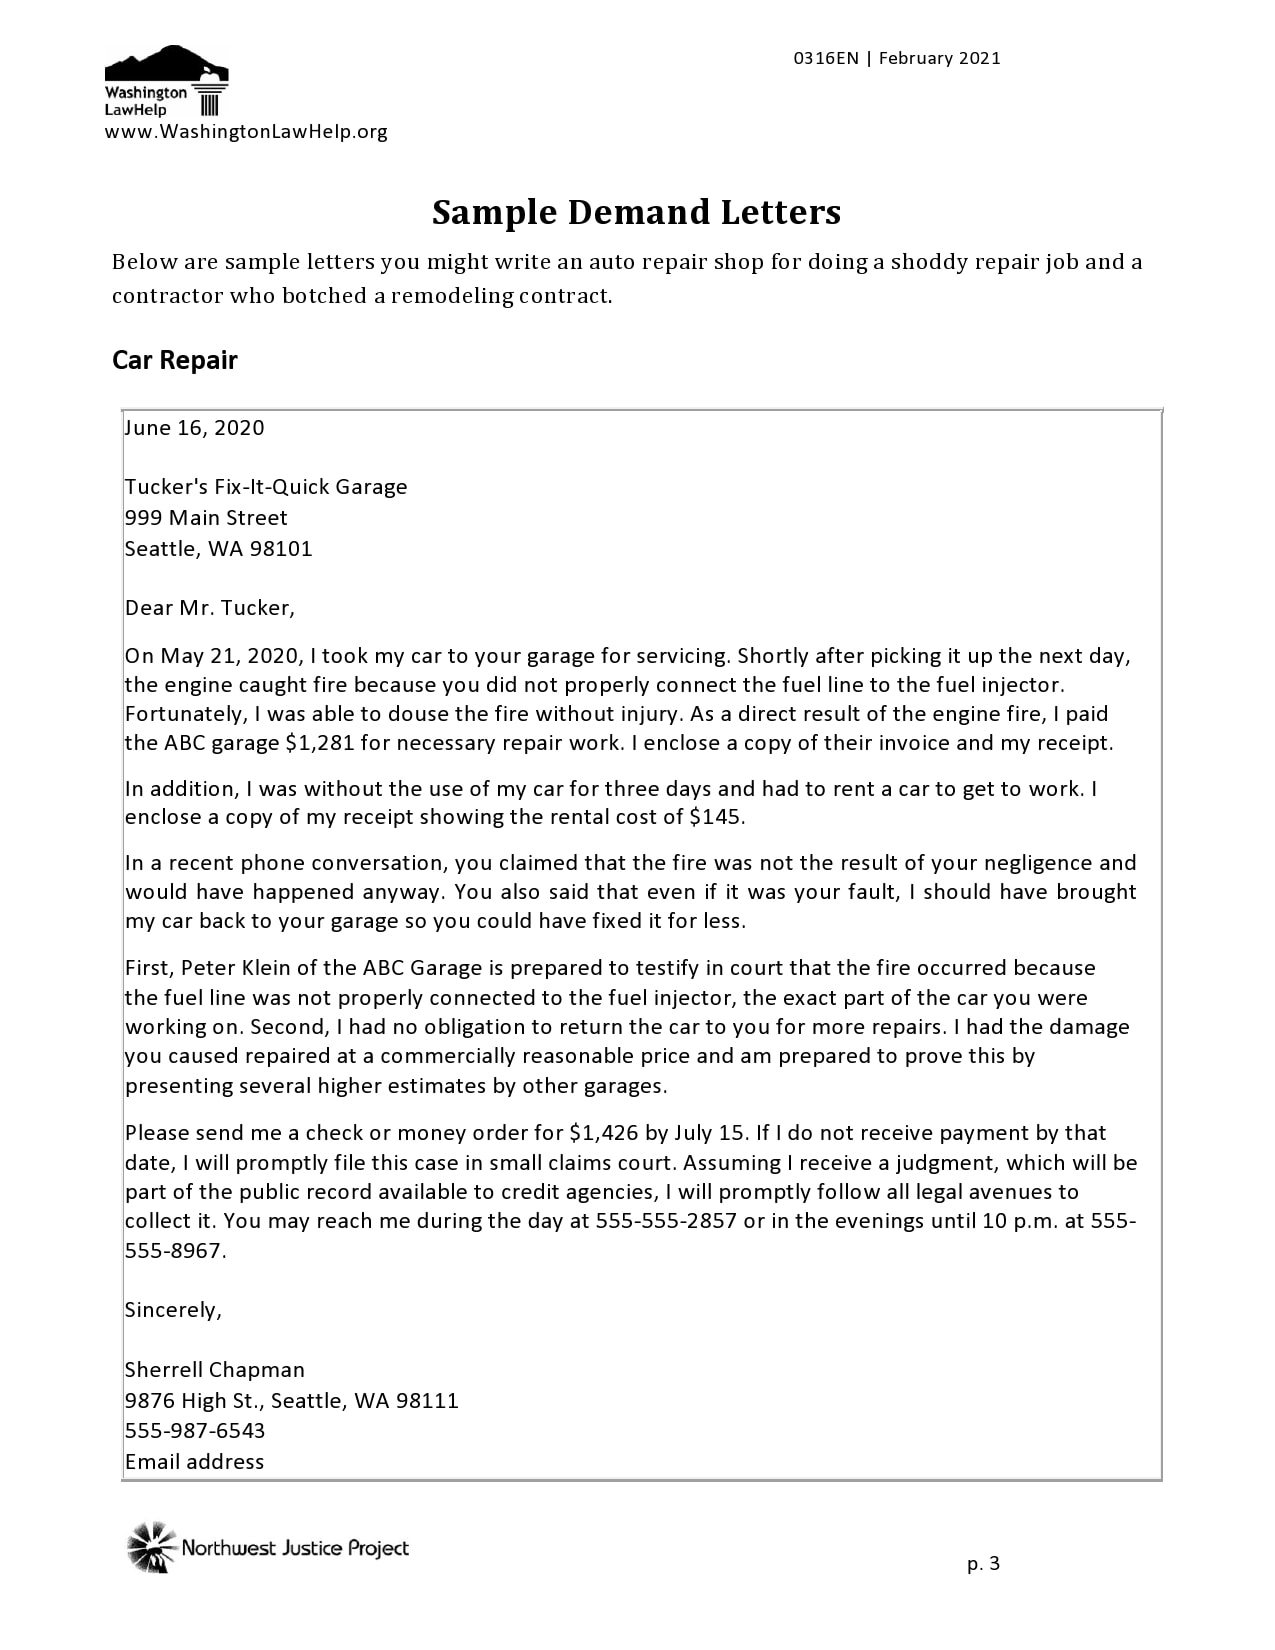 20 Strong Demand For Payment Letters - TemplateArchive